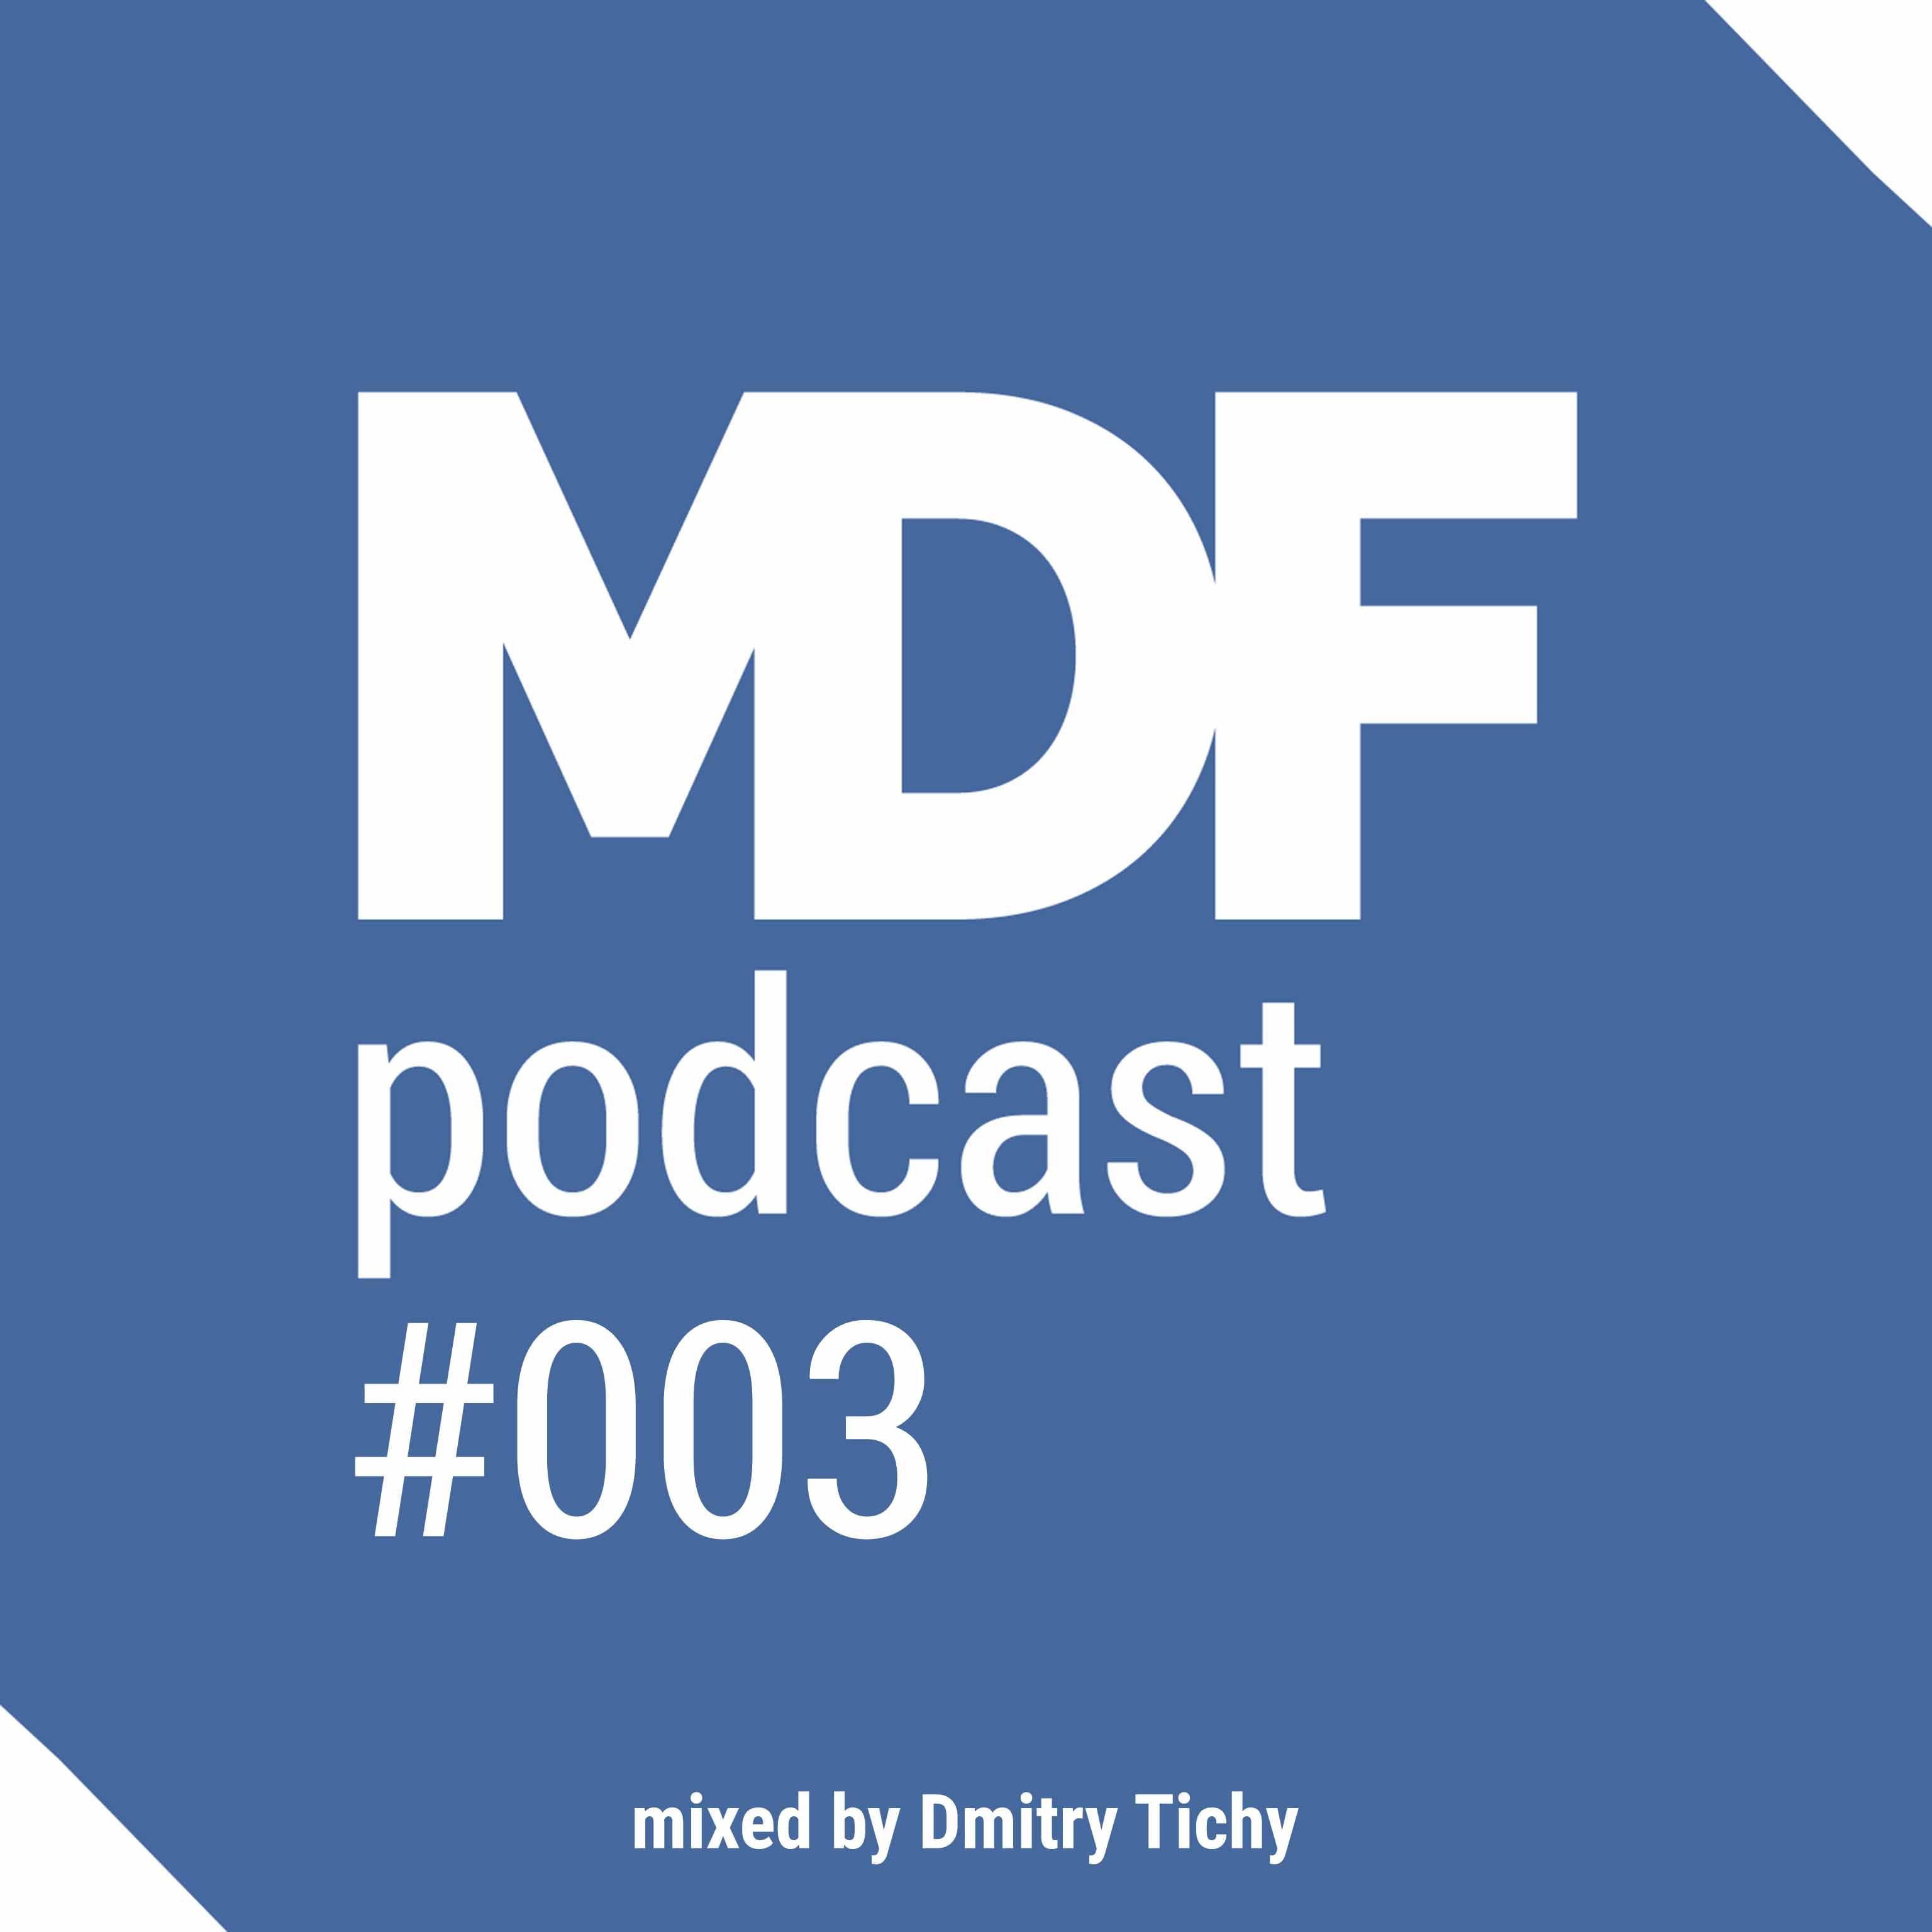 MDF Podcast oo3